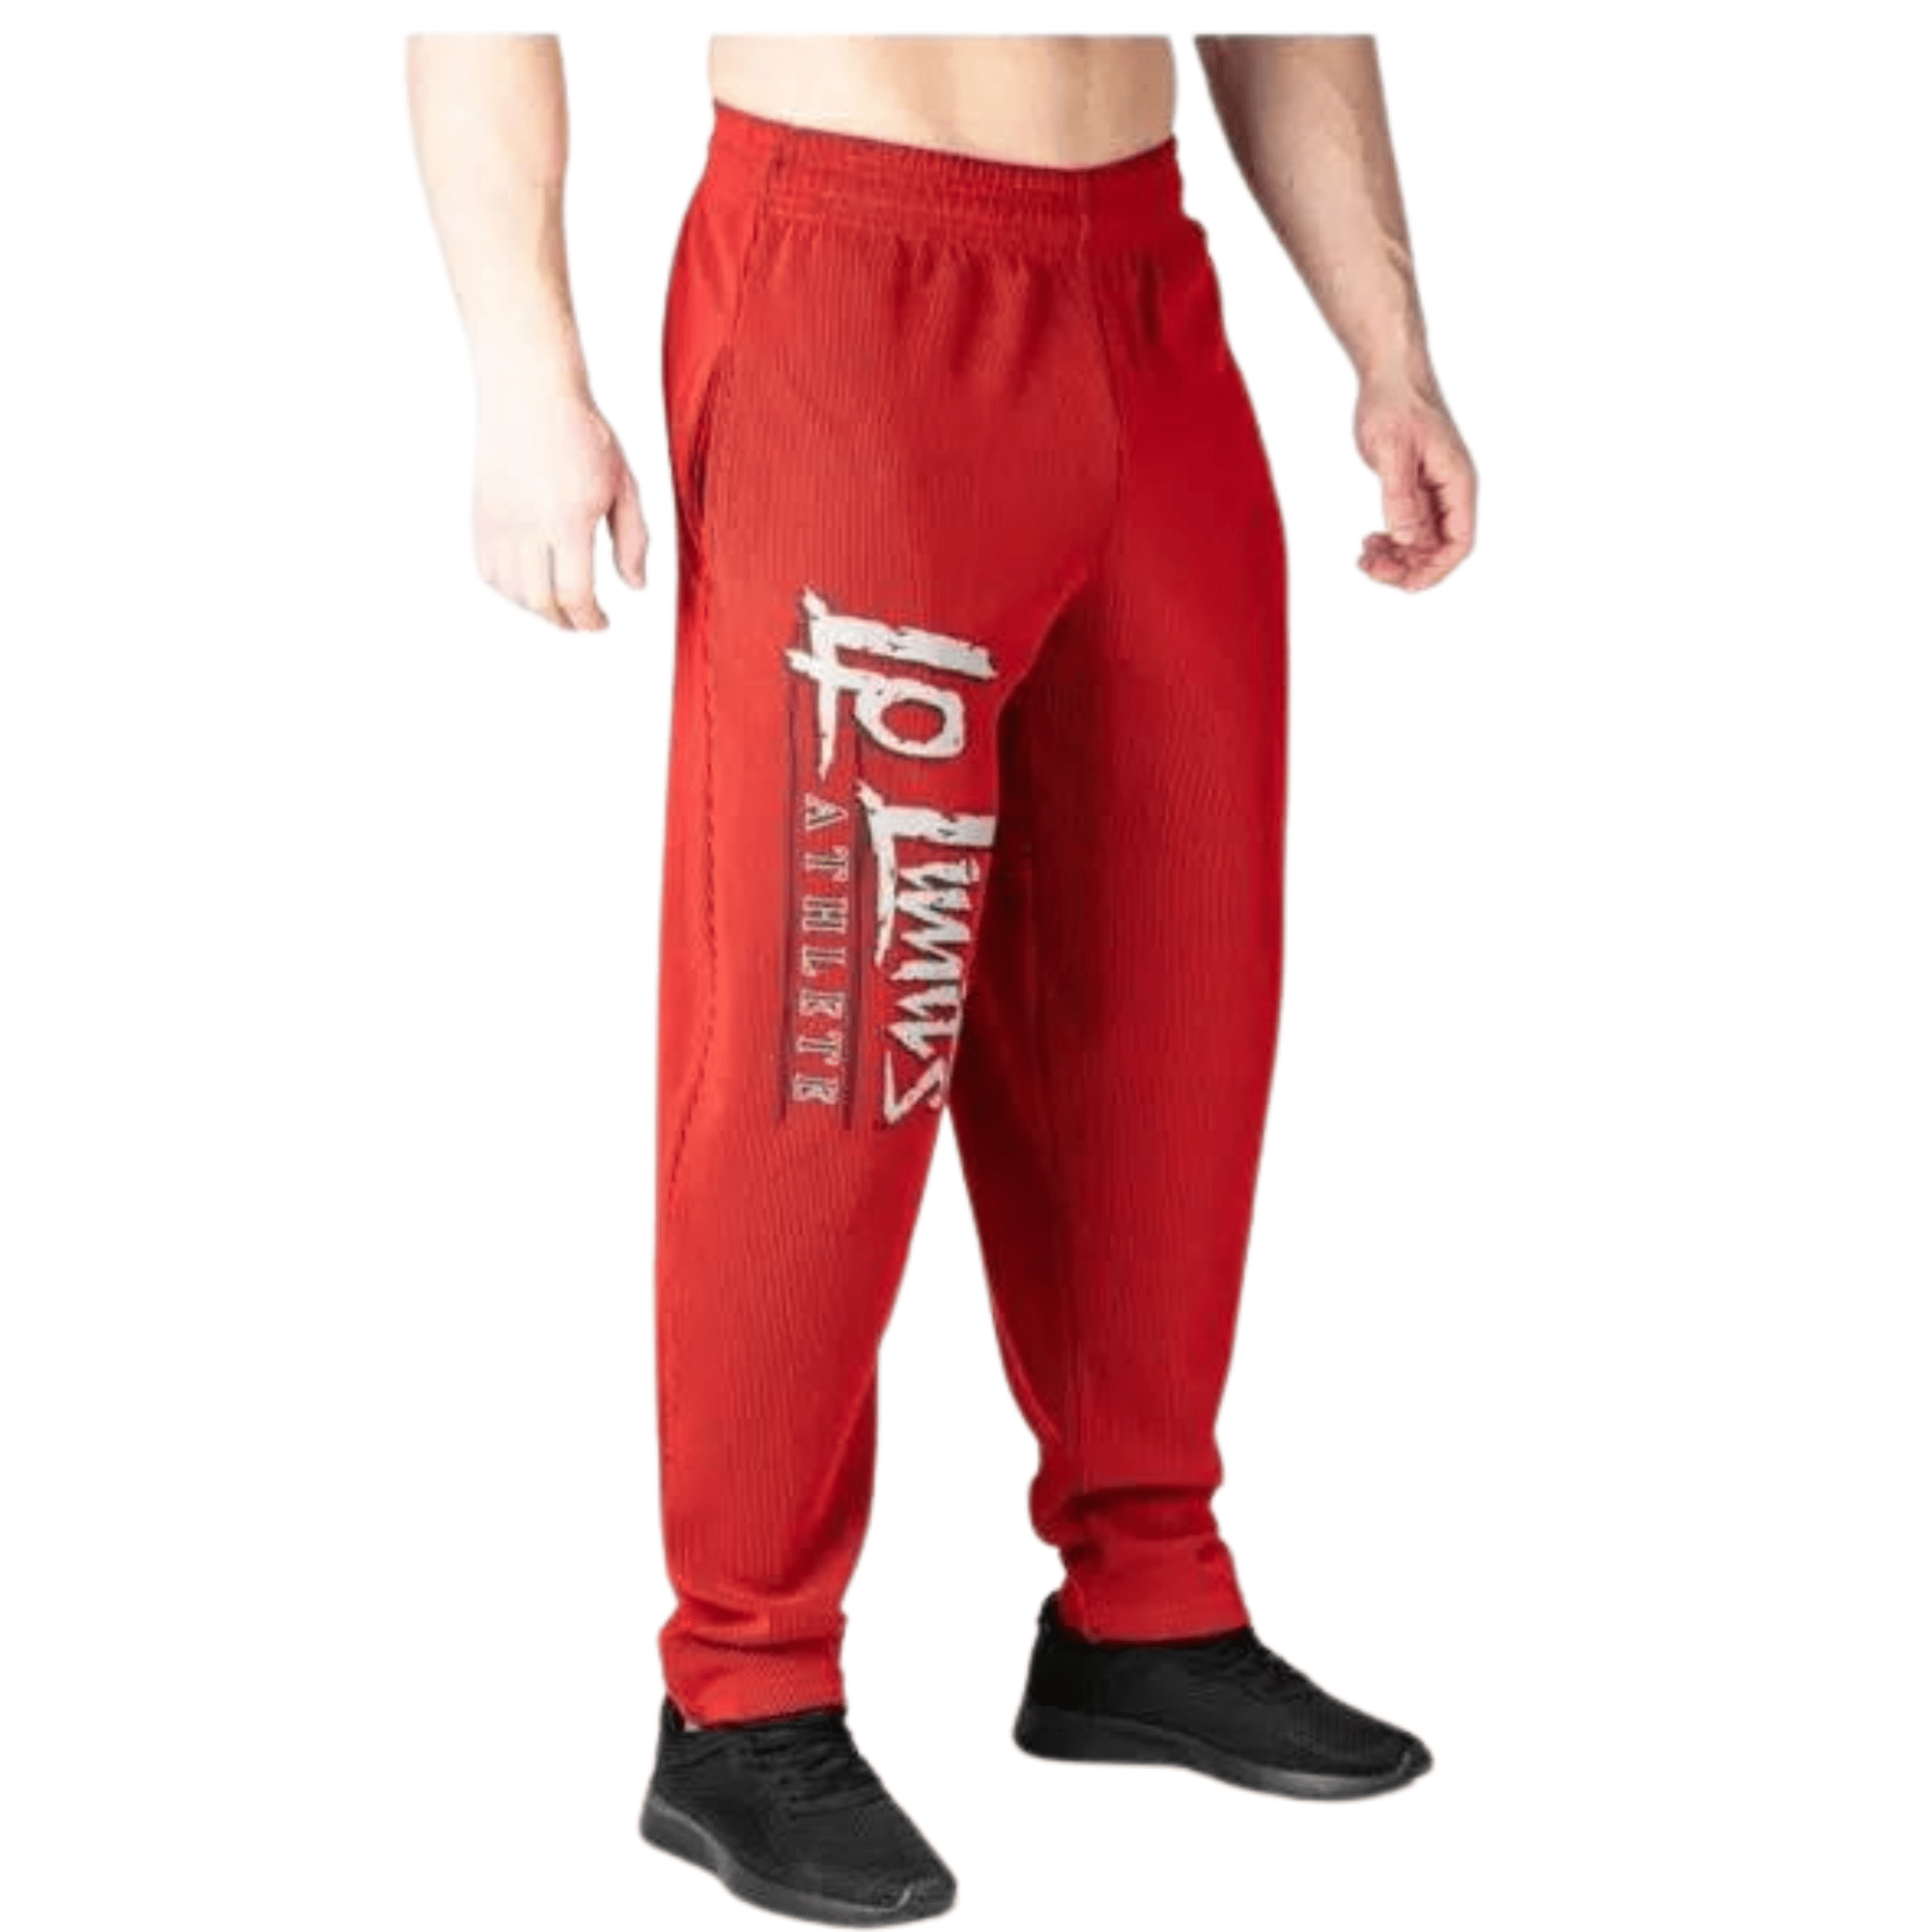 Legal Power Body Pants “MANOTTO” 6202-952 Red